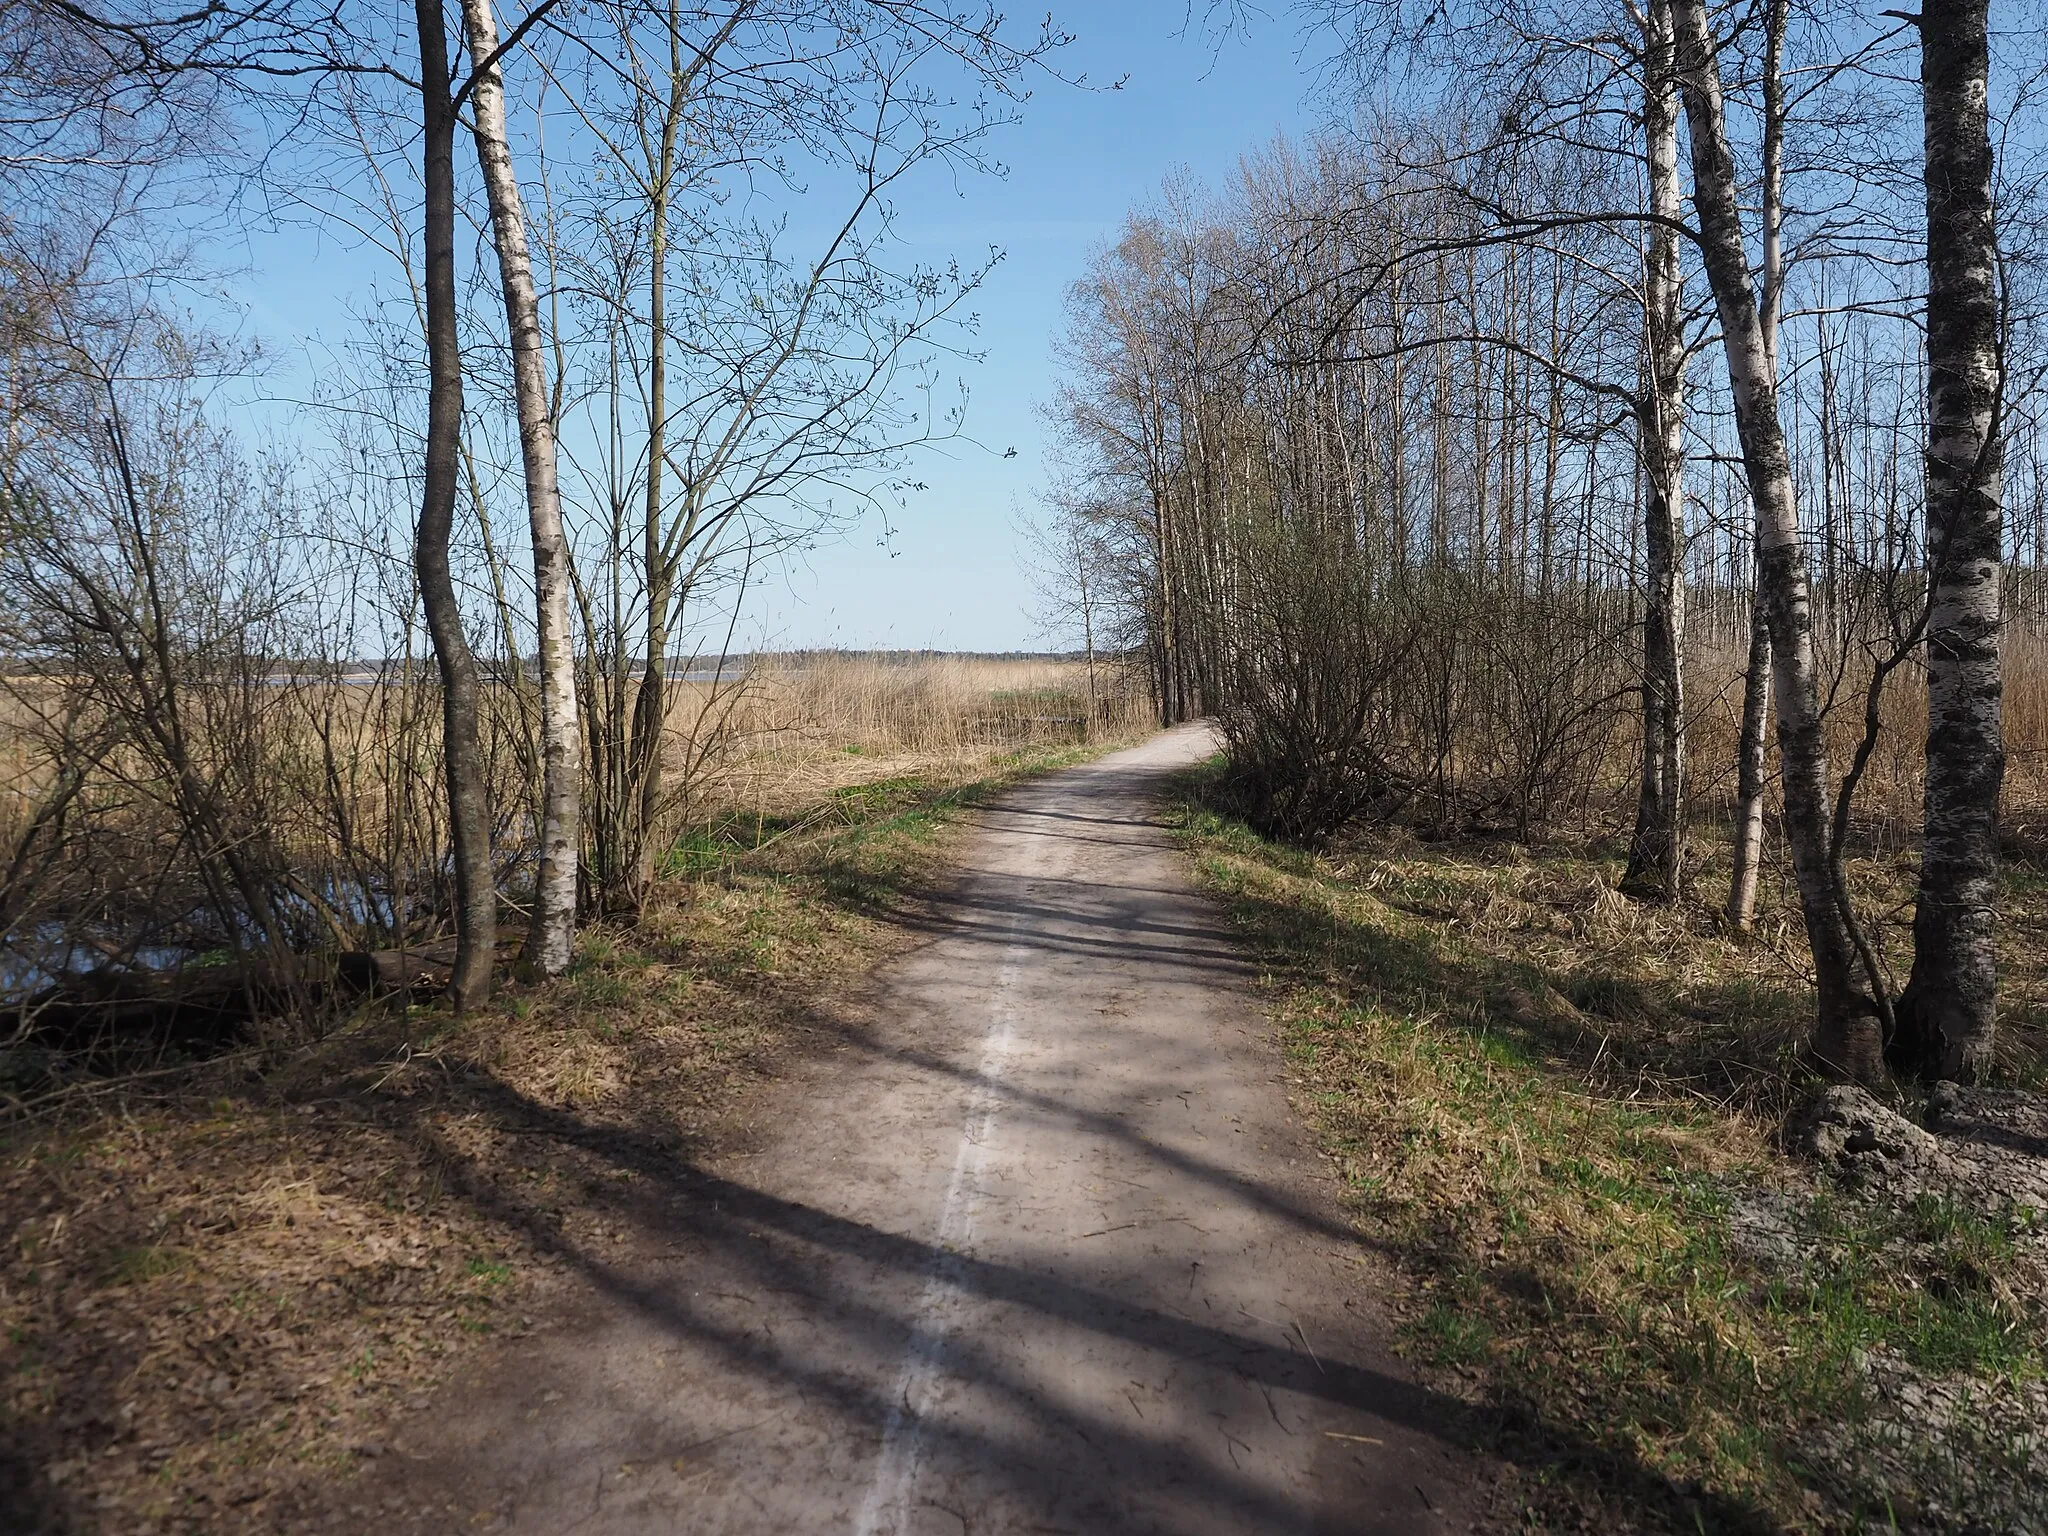 Photo showing: An unpaved pedestrian pathway through the seaside nature in Otaniemi, Espoo, Finland. The route of the annual Länsiväyläjuoksu running event runs along this path (hence the white marking in the middle of the path).